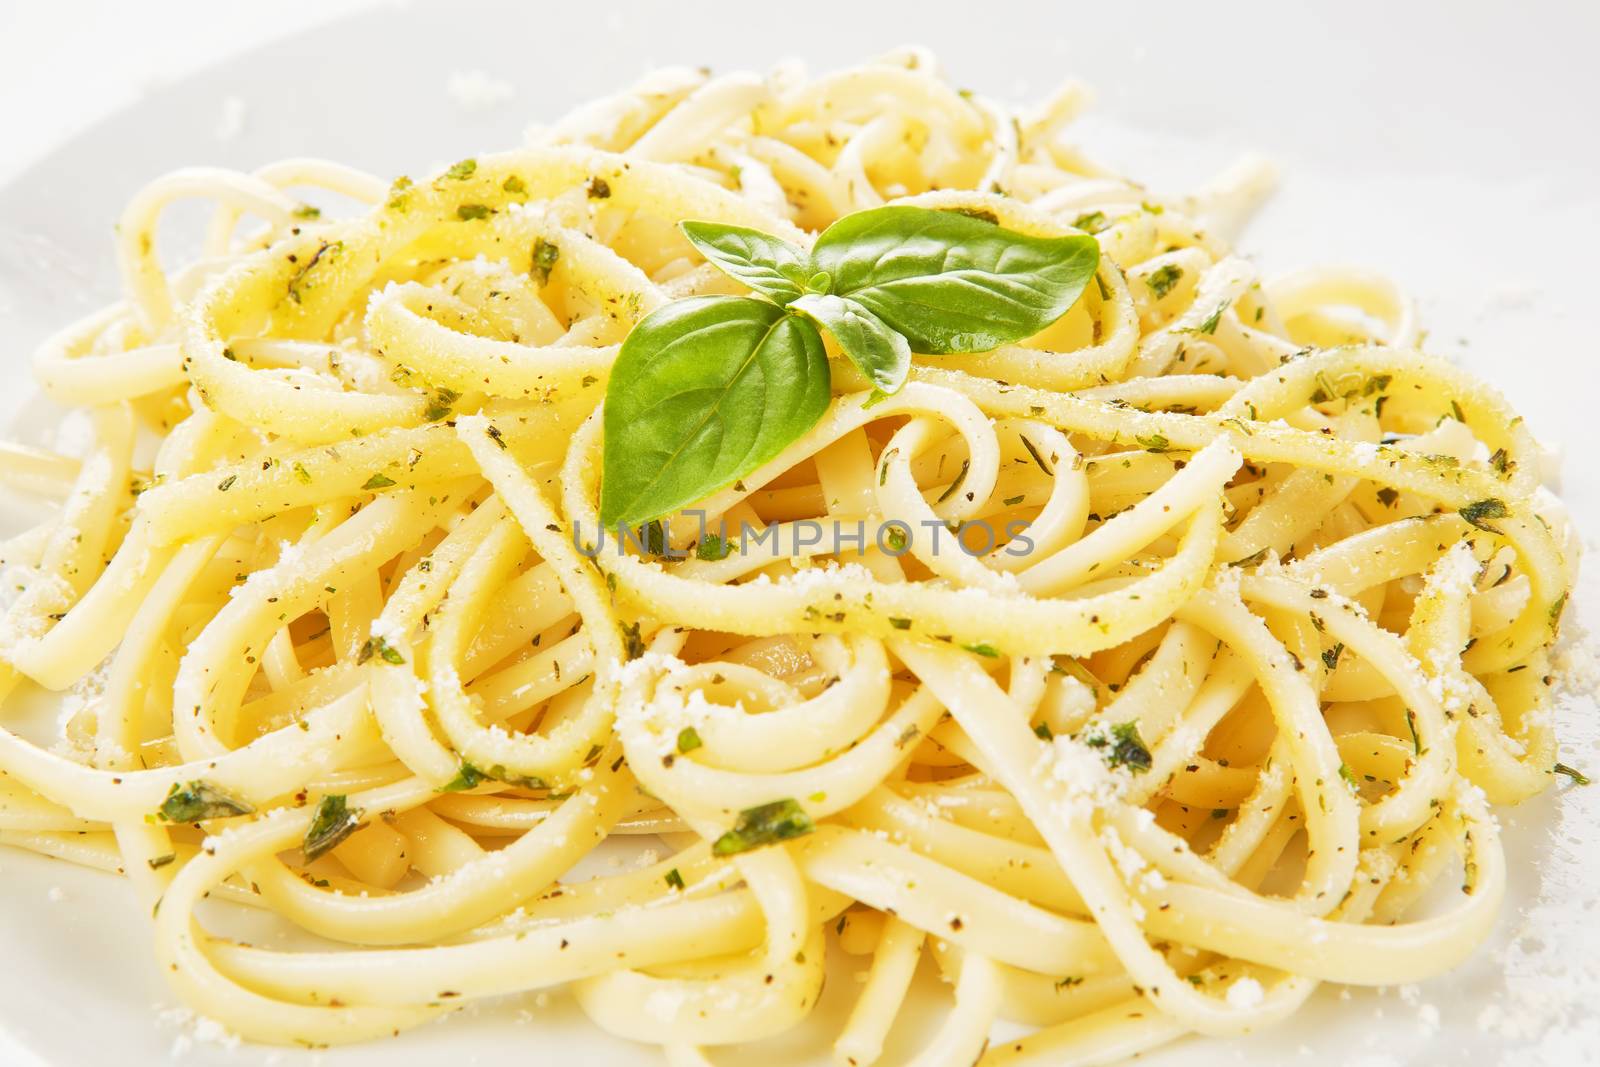 Delicoious spaghetti detail with parmesan cheese and fresh herbs.